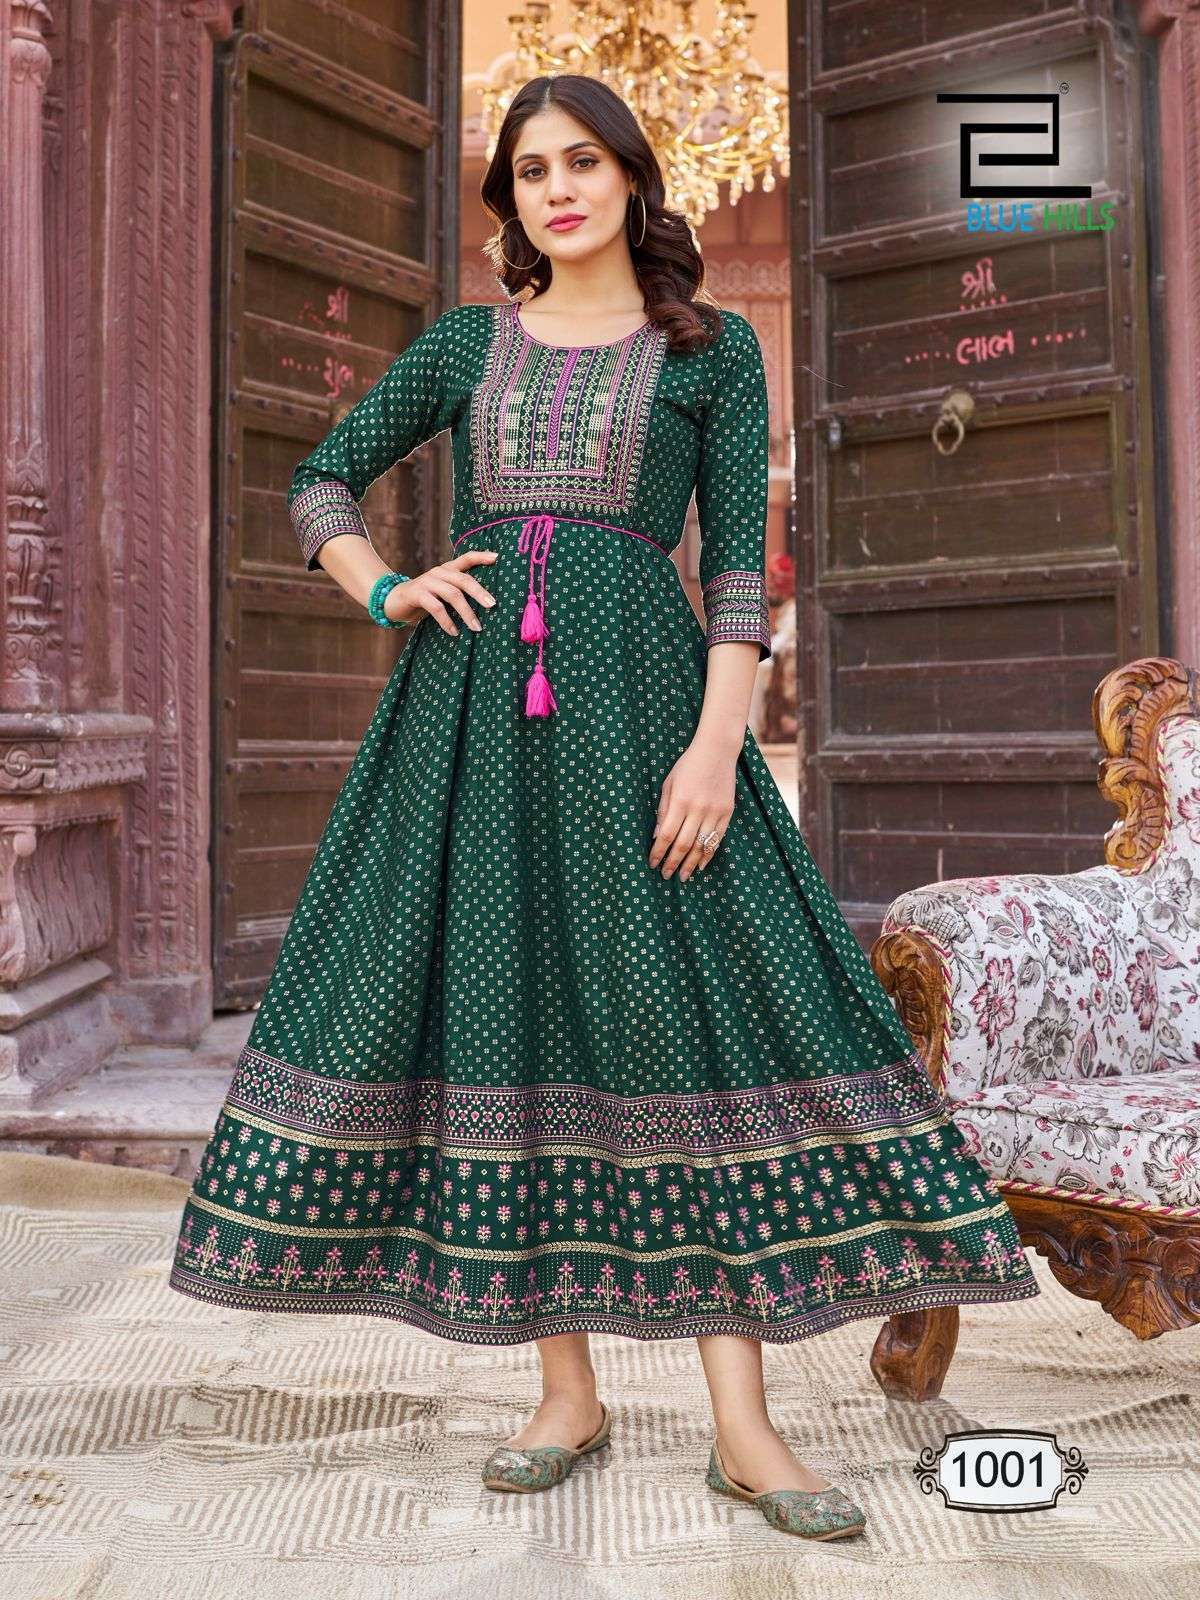 Golden Mohina Heavy Rayon Long Anarkali Kurti Wholesale Collection in india